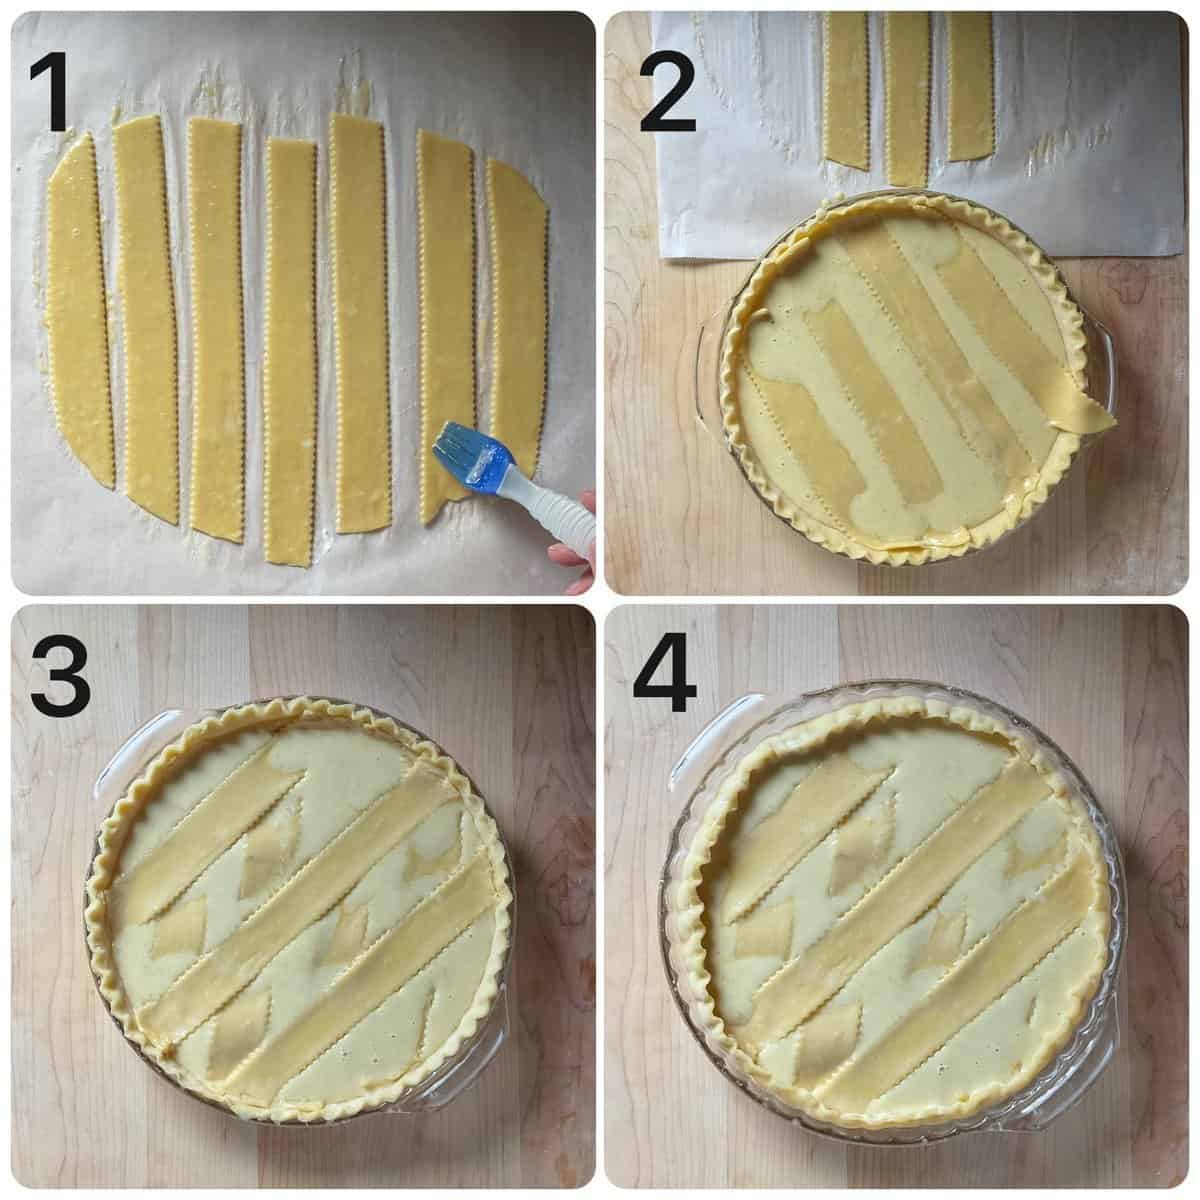 Step by step process to create the lattice top for the pastiera.